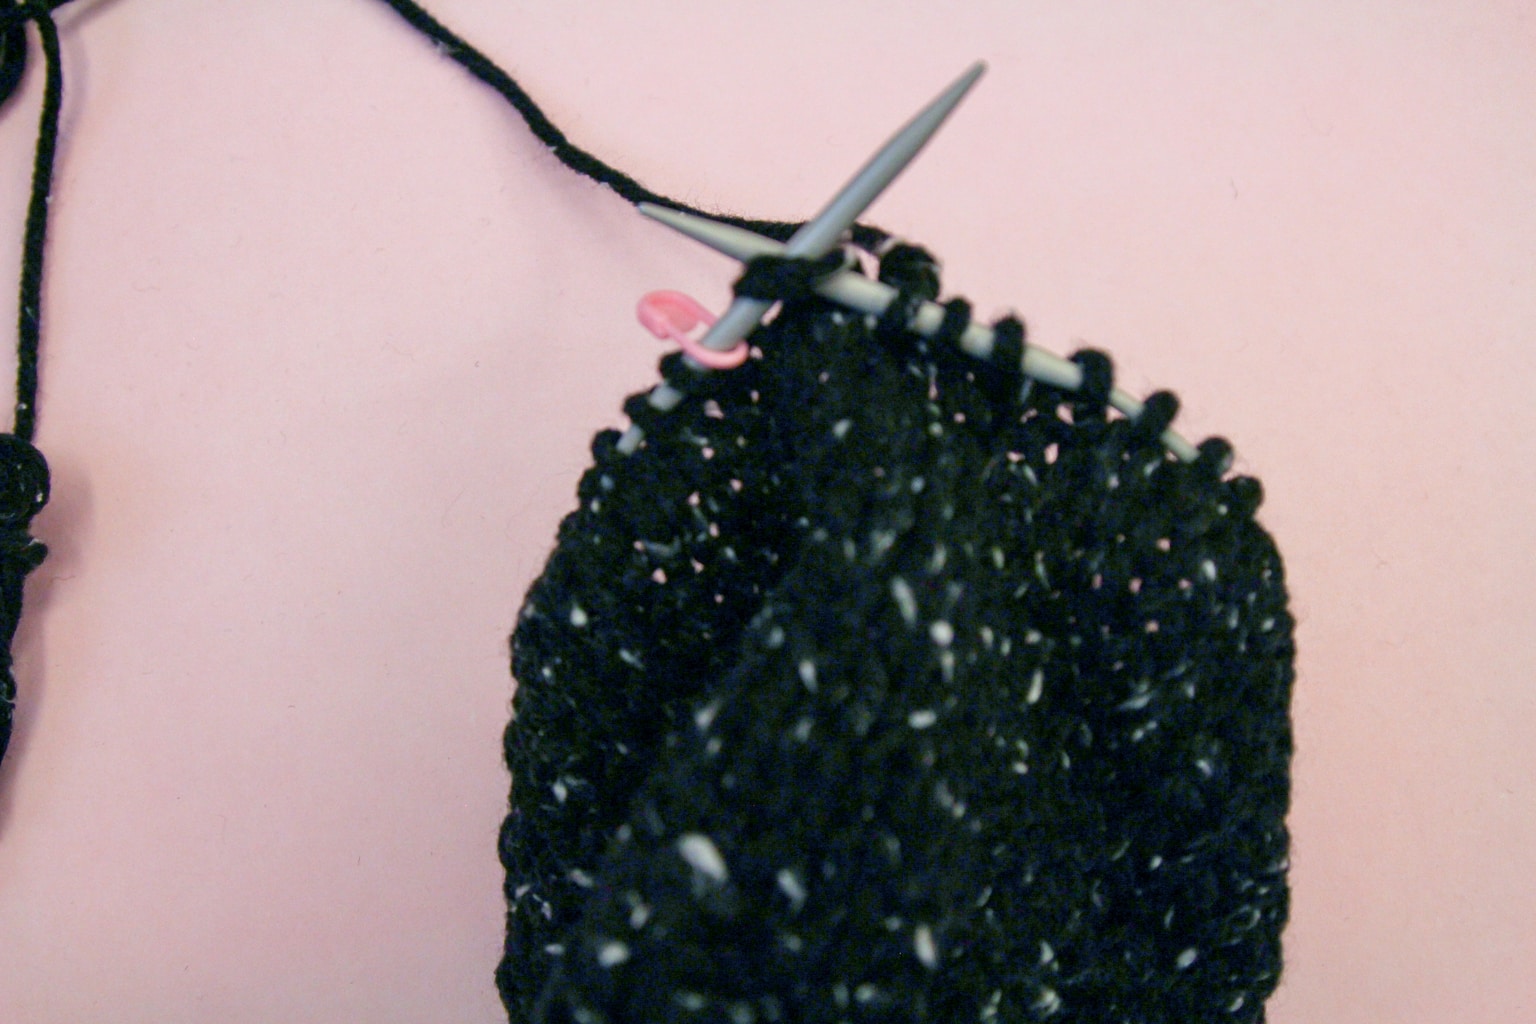 Learn to knit with this easy beanie tutorial!